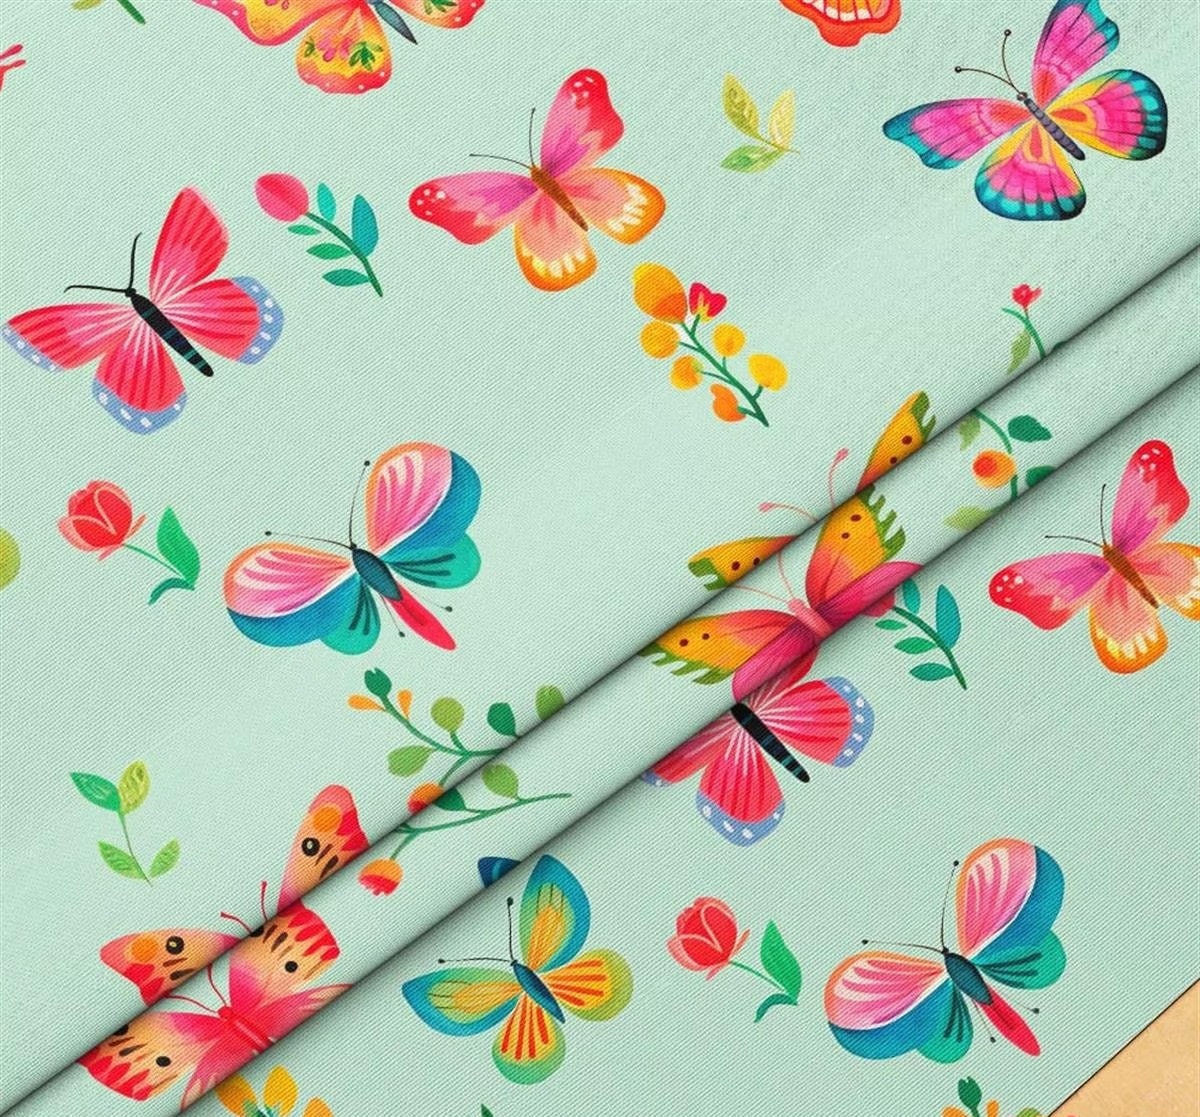 Butterfly Indian Fabric by Yard Indian Handmade Cloth Material